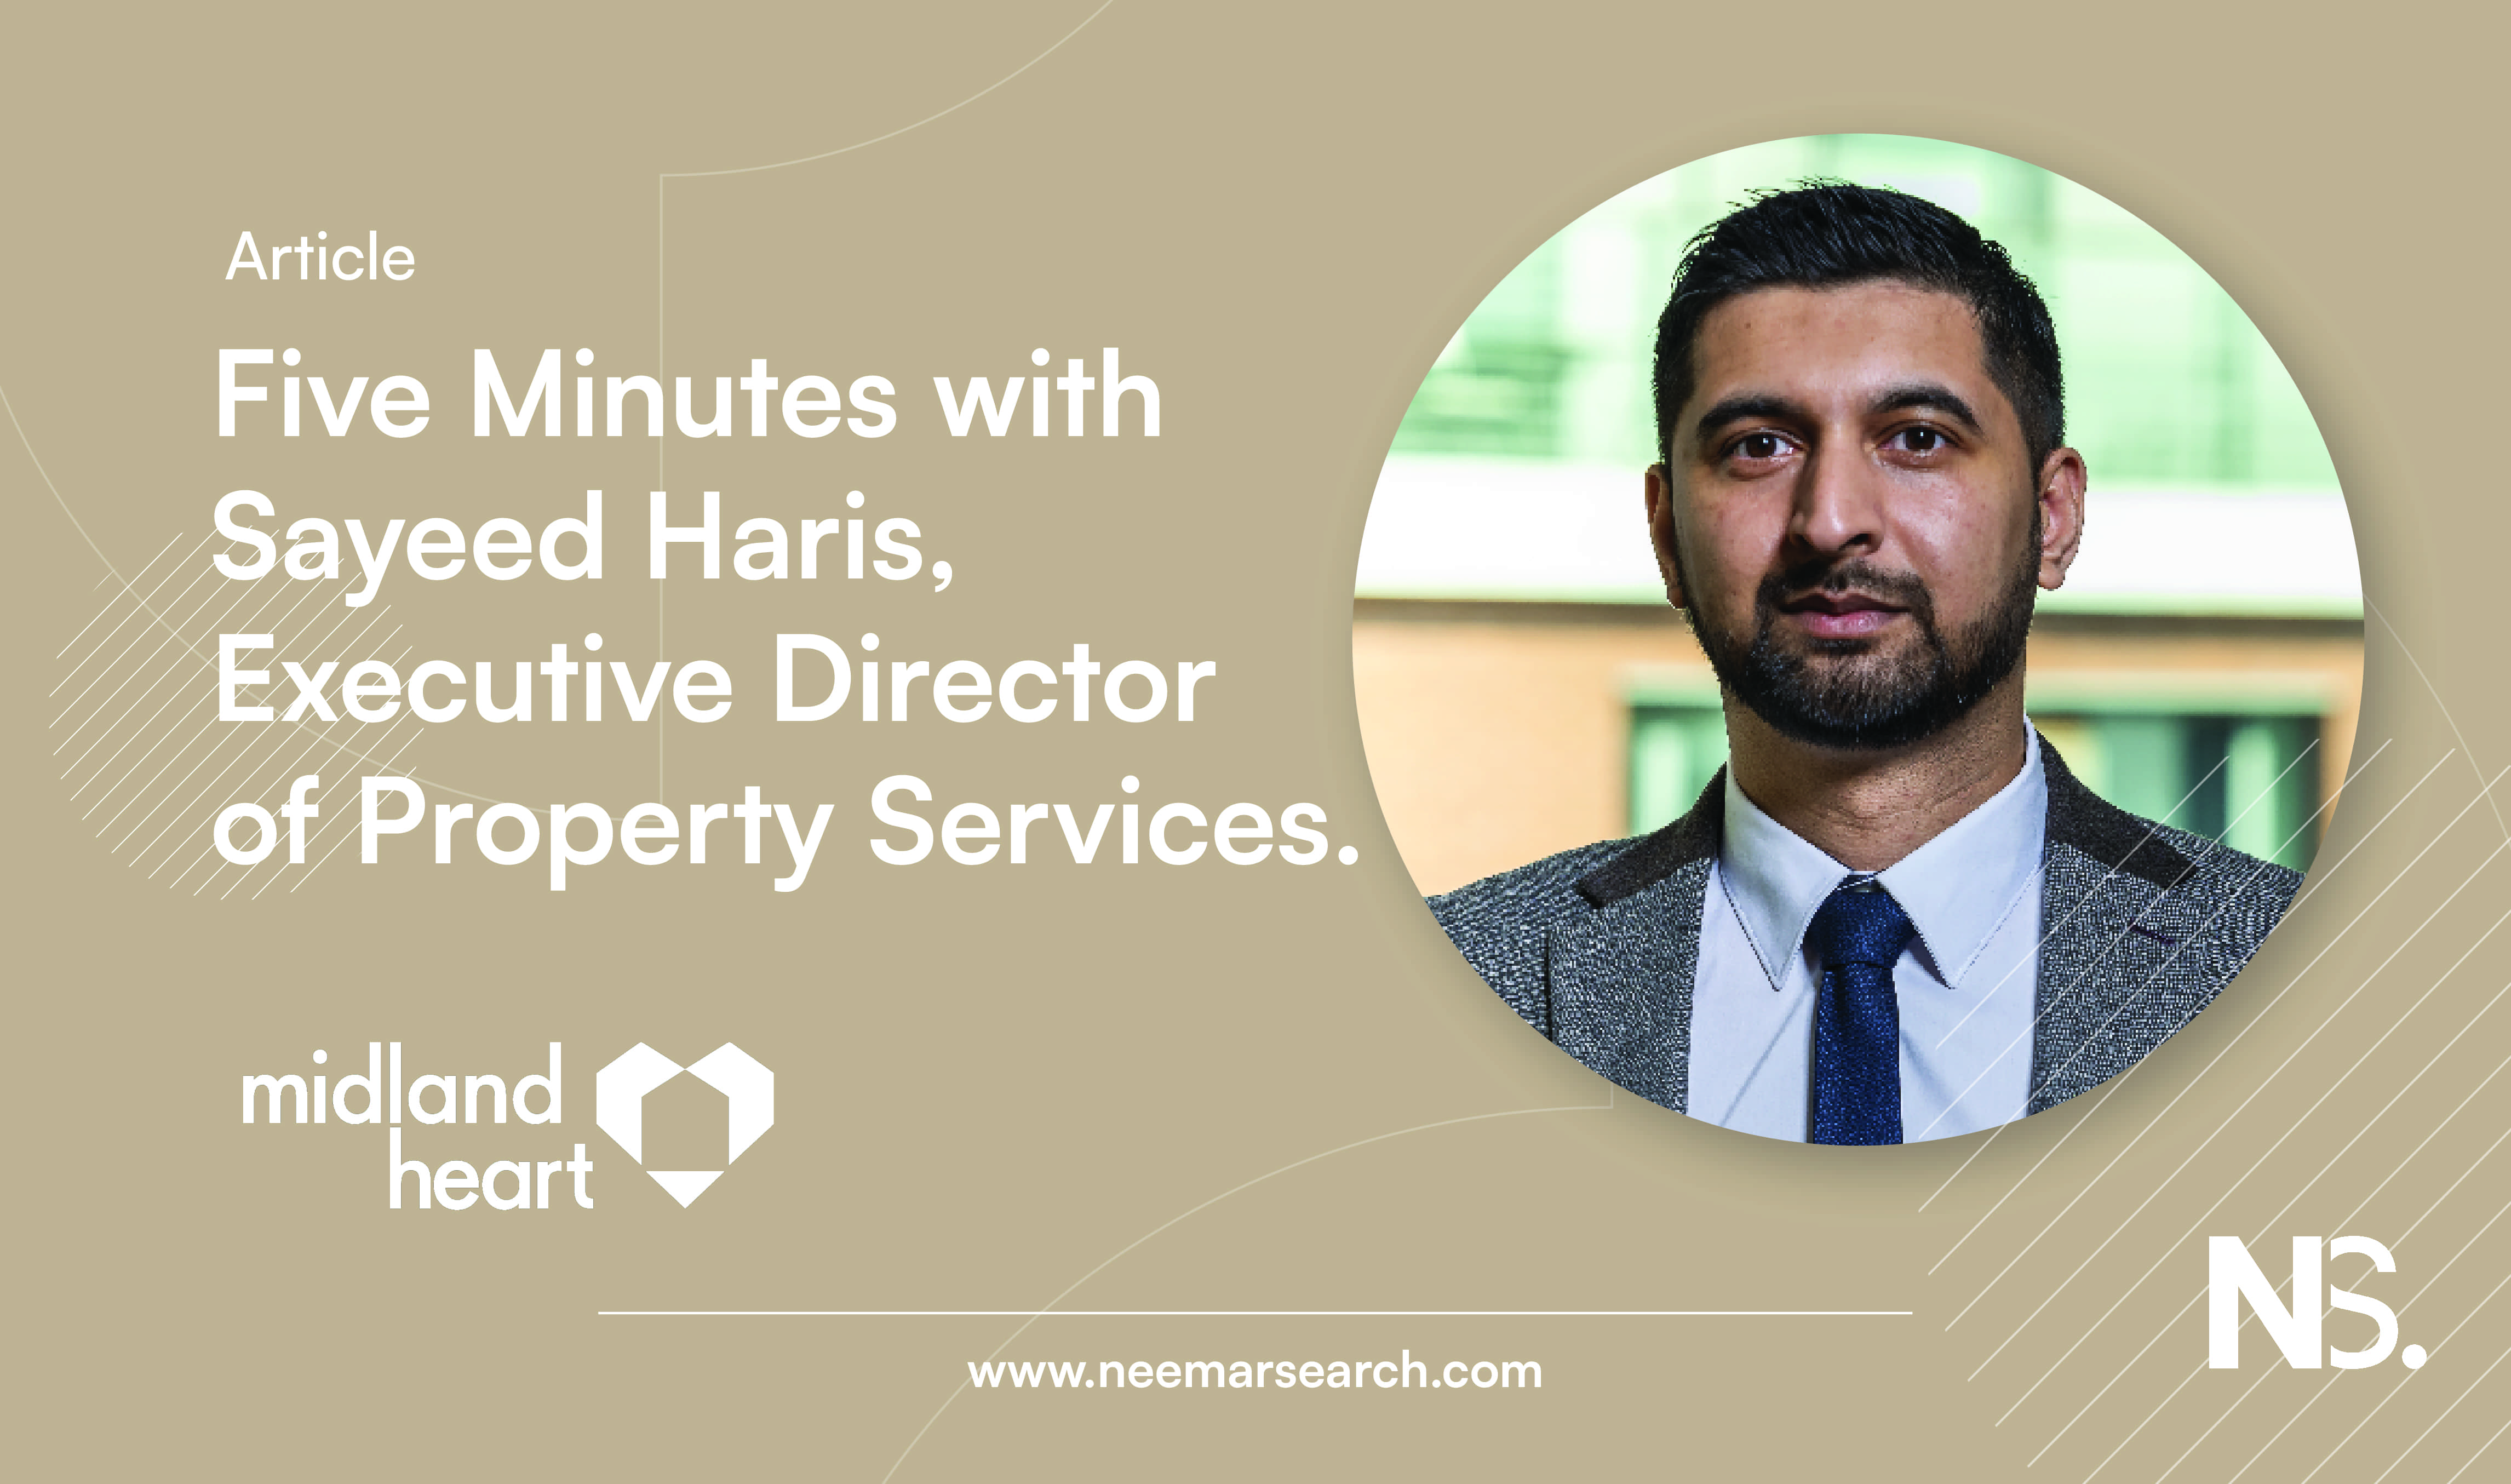 Five Minutes with Sayeed Haris, Executive Director of Property Services at Midland Heart.